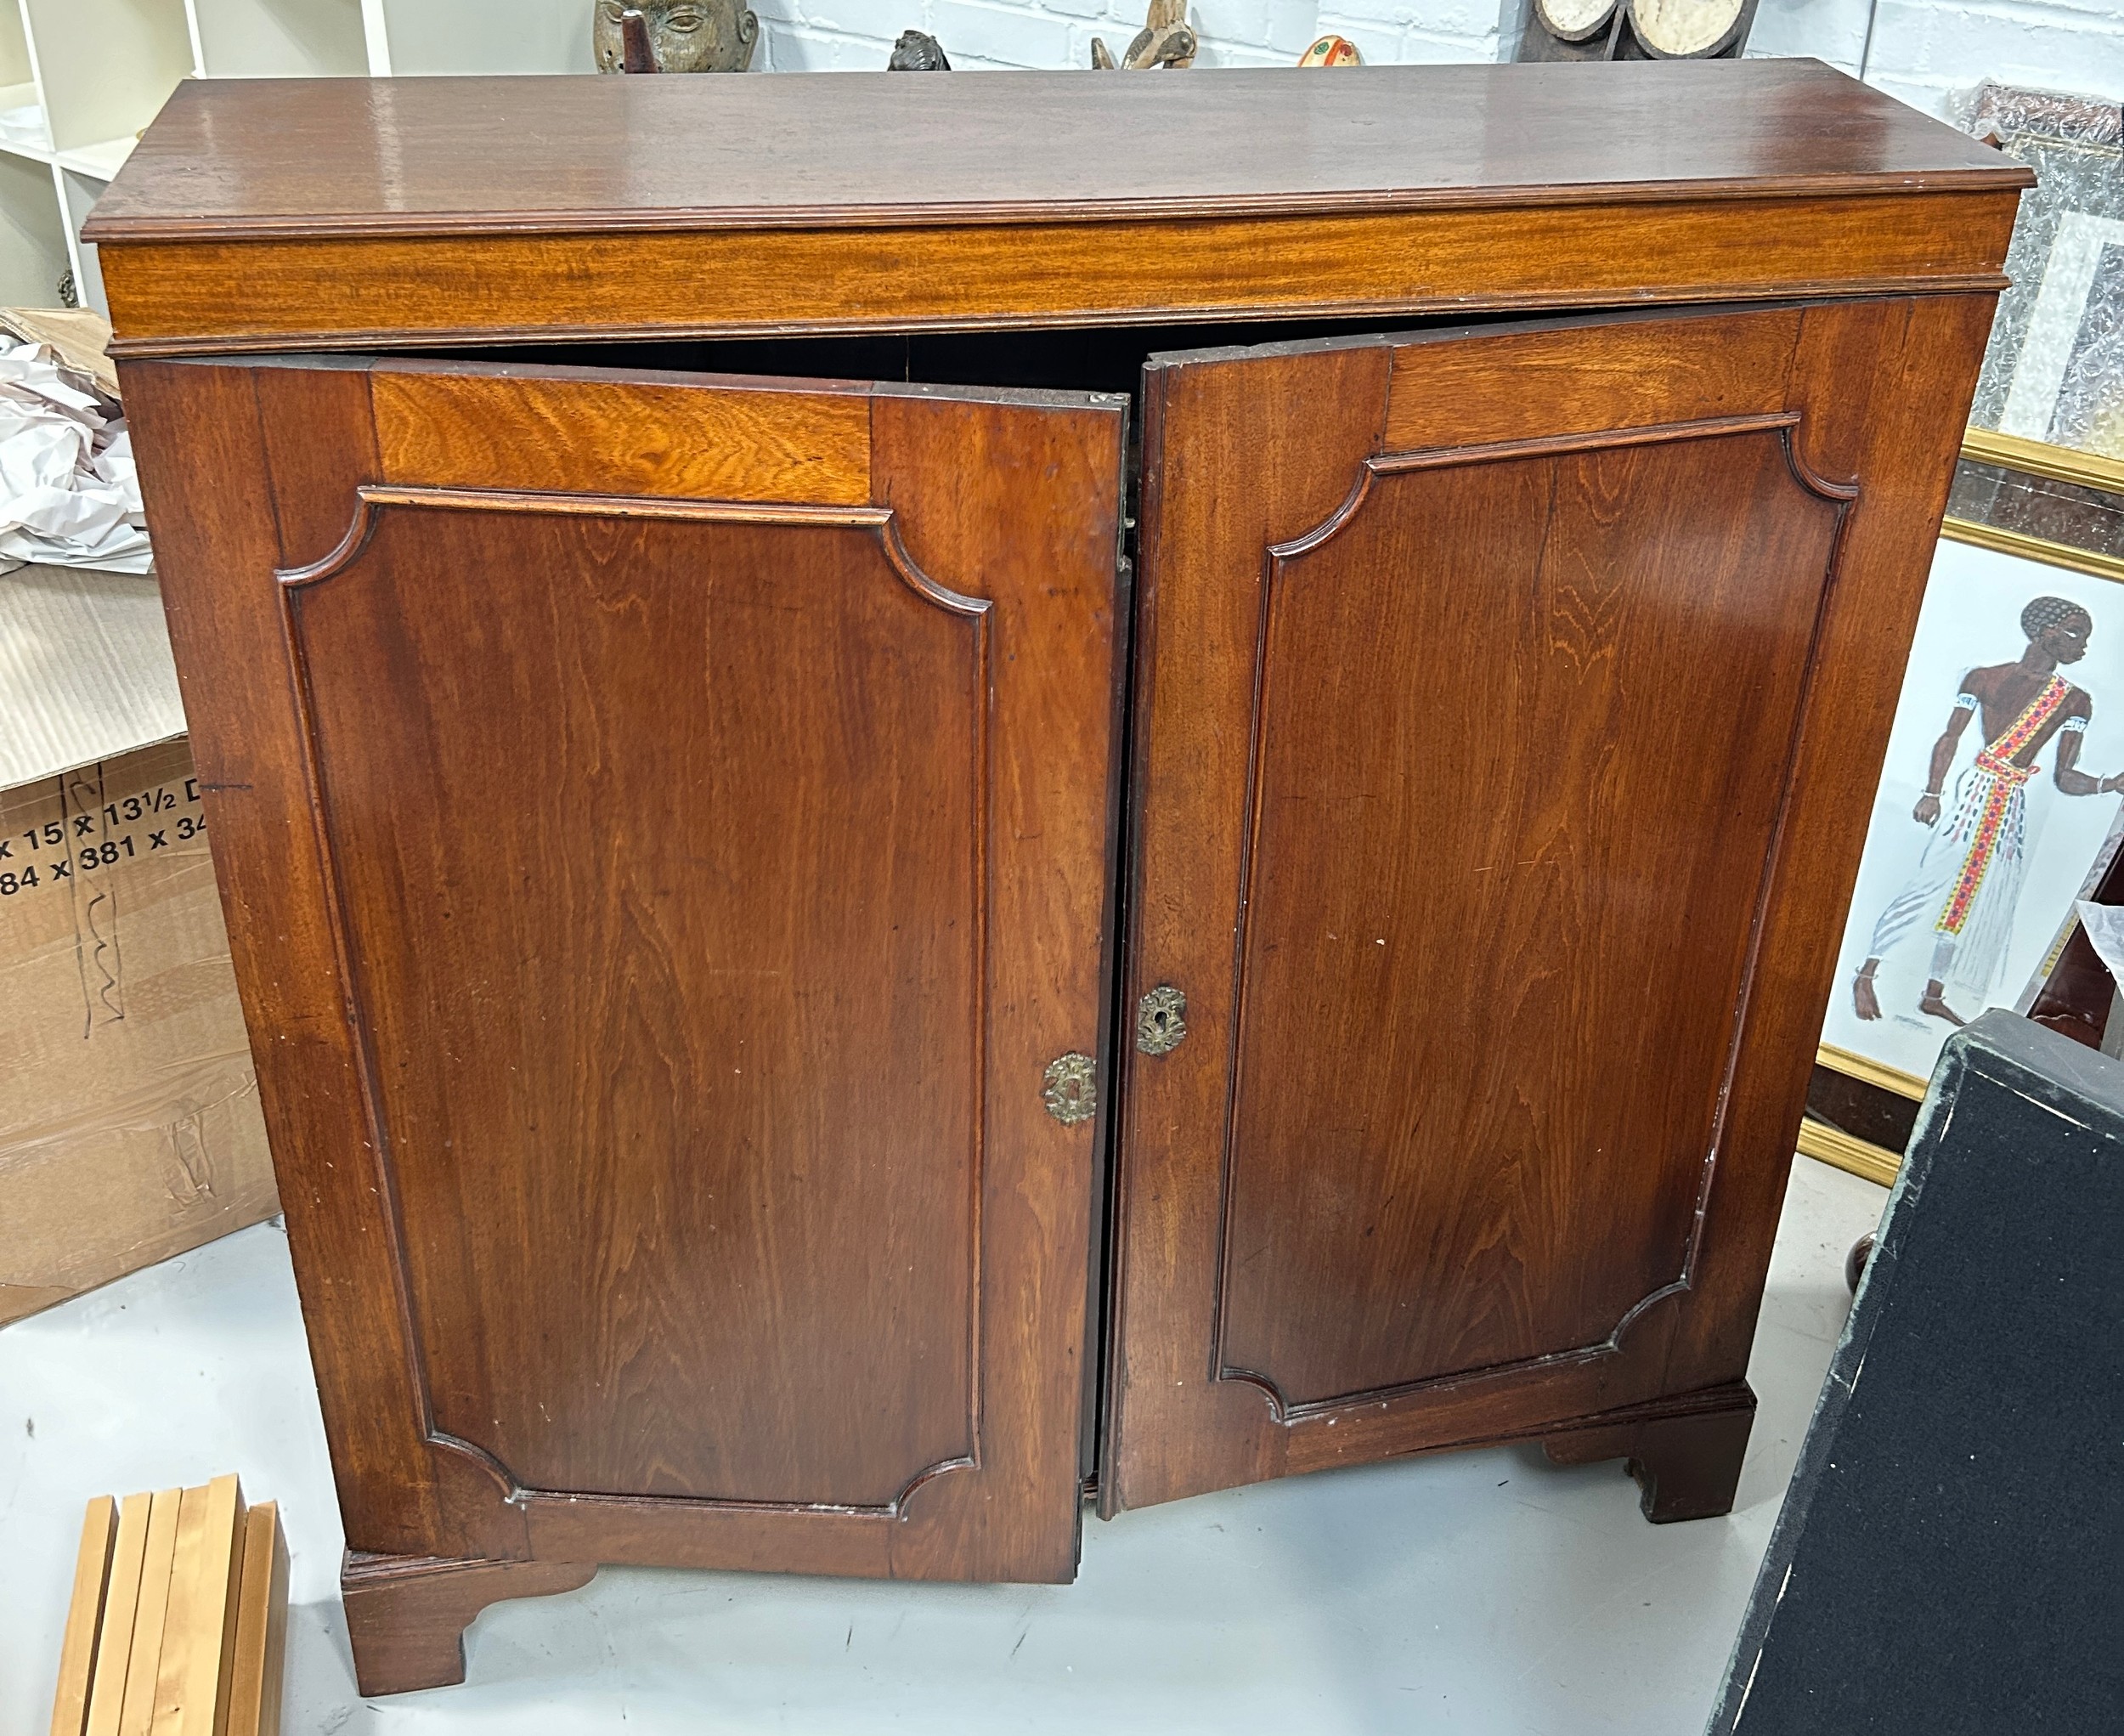 A MAHOGANY CUPBOARD OF SHALLOW PROPORTIONS WITH TWO SWING DOORS, 109cm x 100cm x 27cm - Image 2 of 2